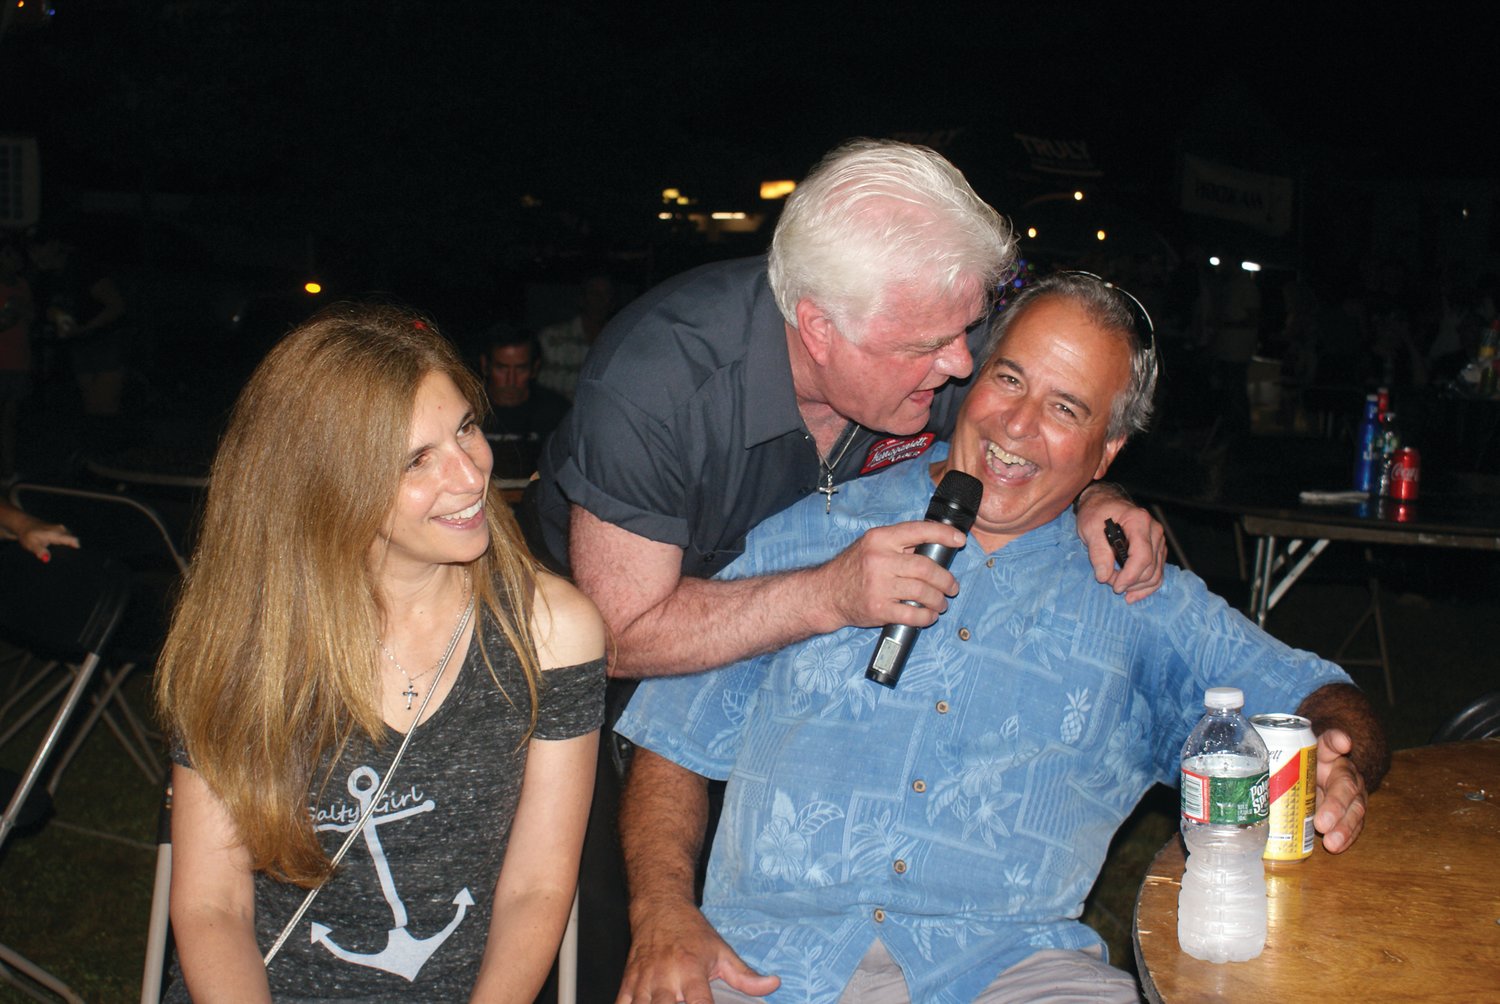 FUN WITH THE CROWD: Steve Smith from the band Steve Smith and the Nakeds, which performed Friday night at the St. Mary’s Feast, had some fun with audience member Stan Colasante and his friend Marisa Castello. 